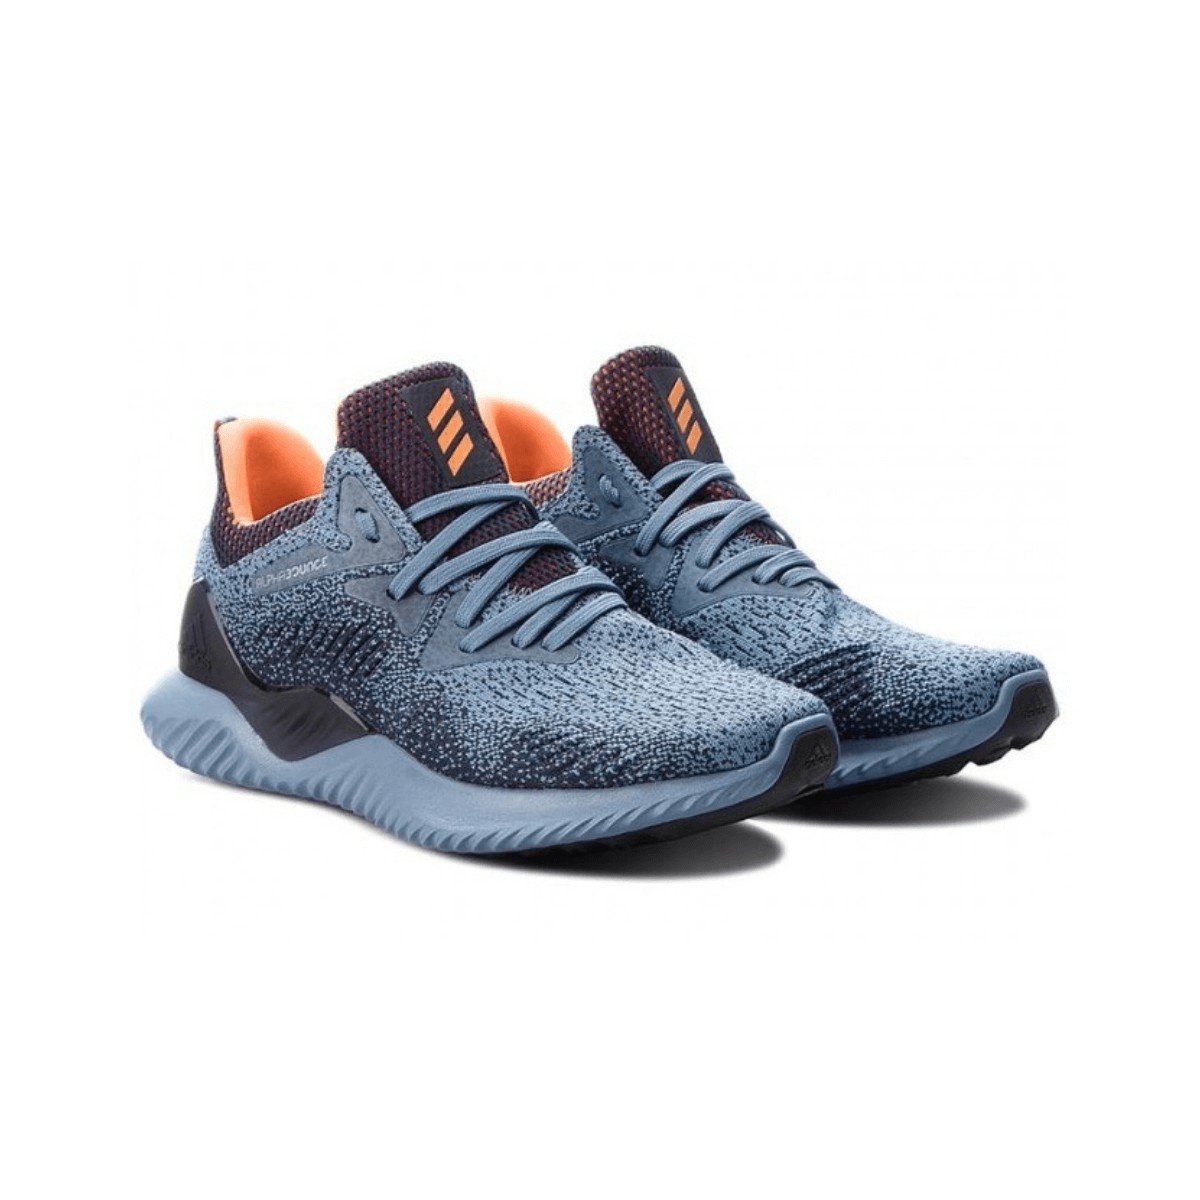 adidas alphabounce beyond mens running shoes